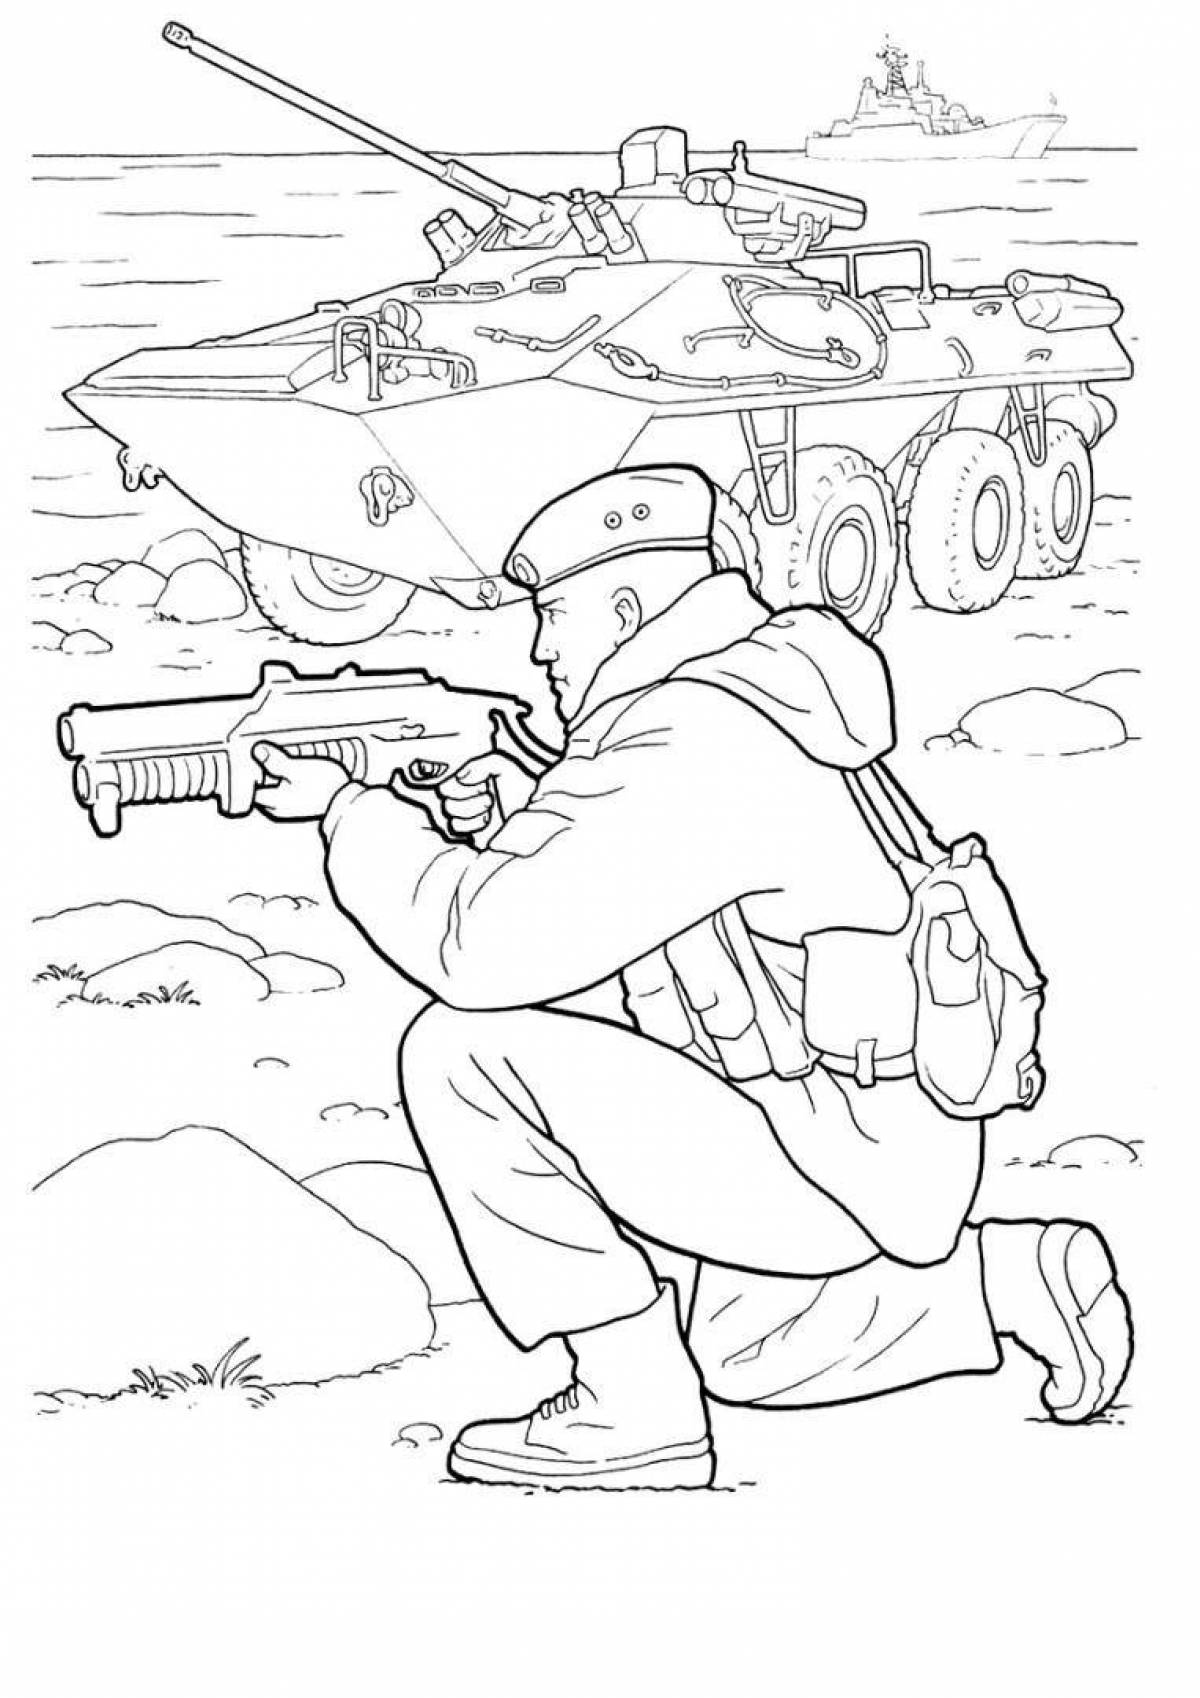 Impressive military coloring book for 5-6 year olds